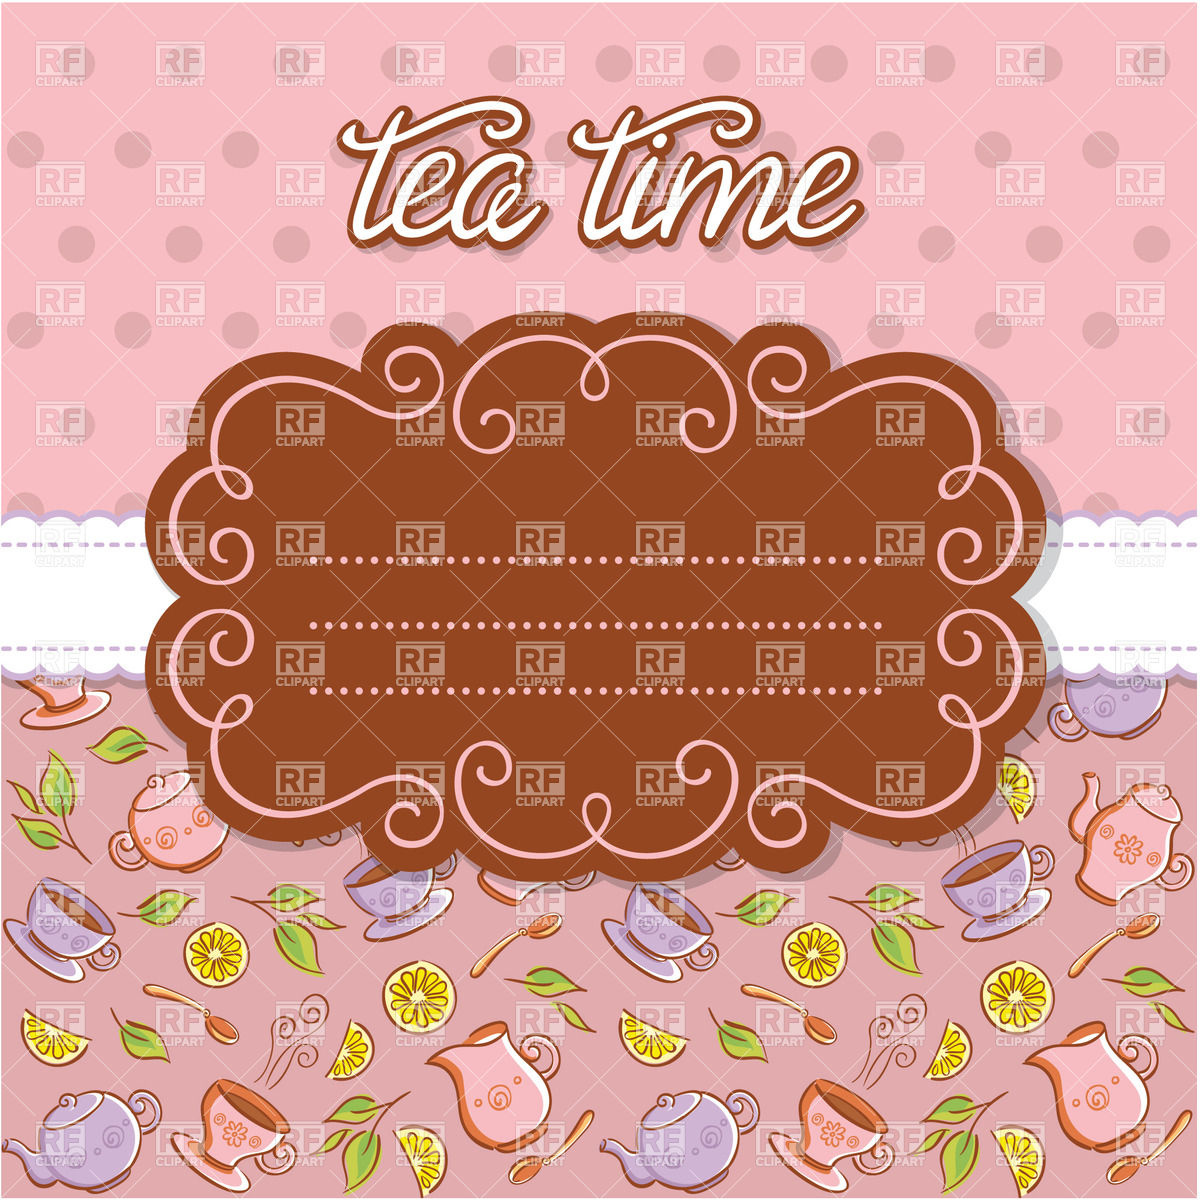 Tea Party Invitation   Curly Frame On Tableware Background 30004    